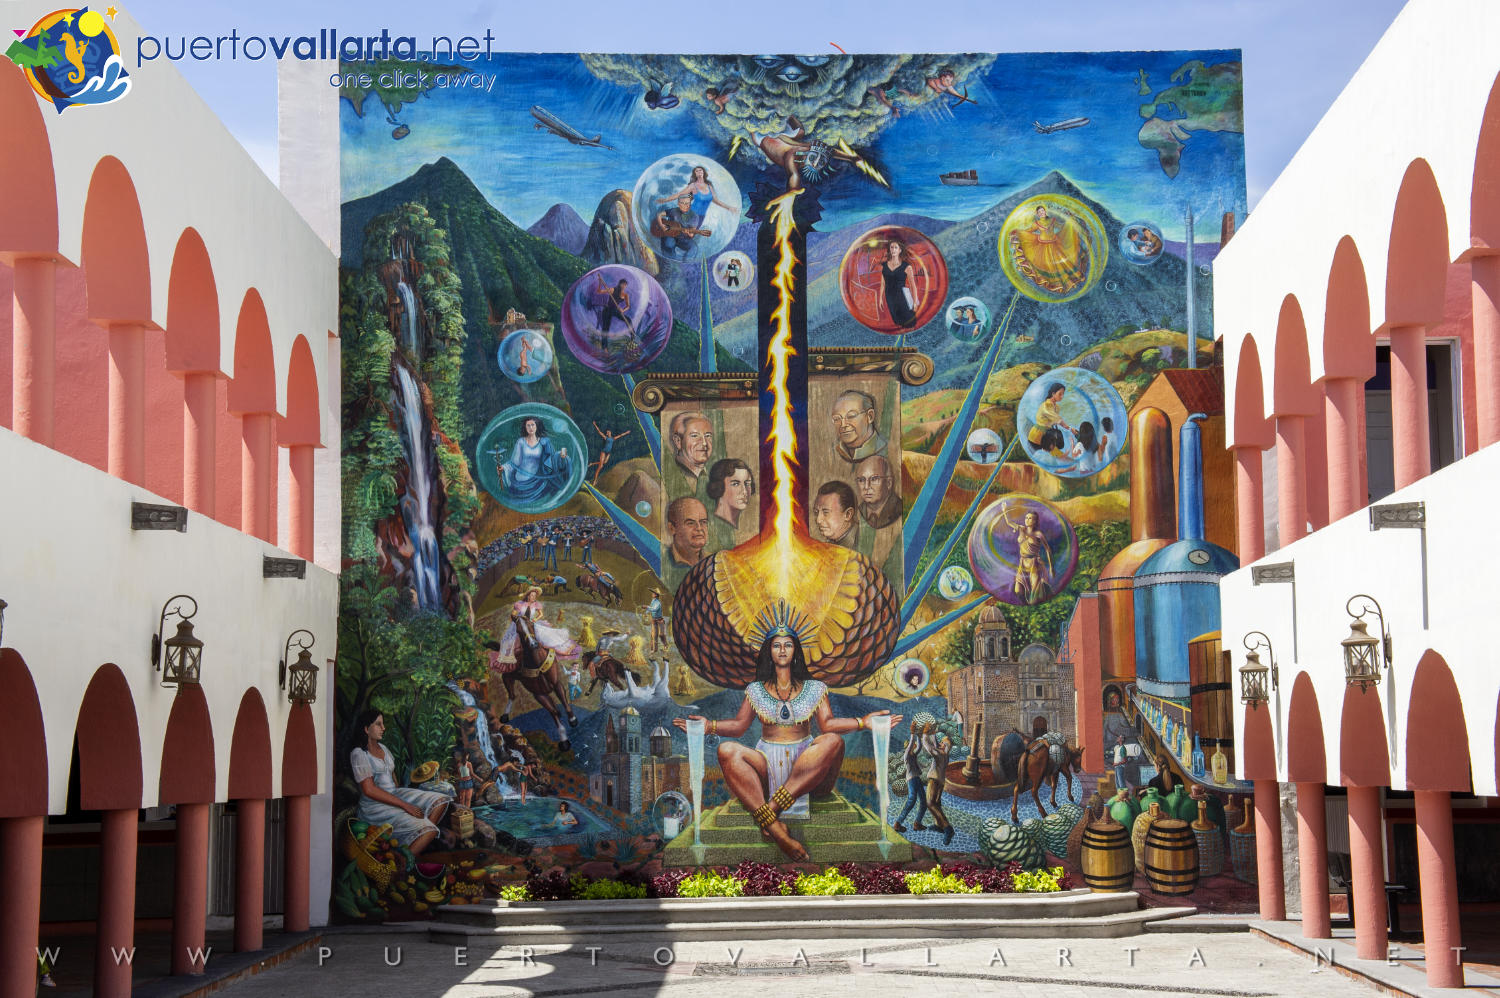 The Tequila Goddess Wall mural Municipio de Tequila (Tequila Town Hall)